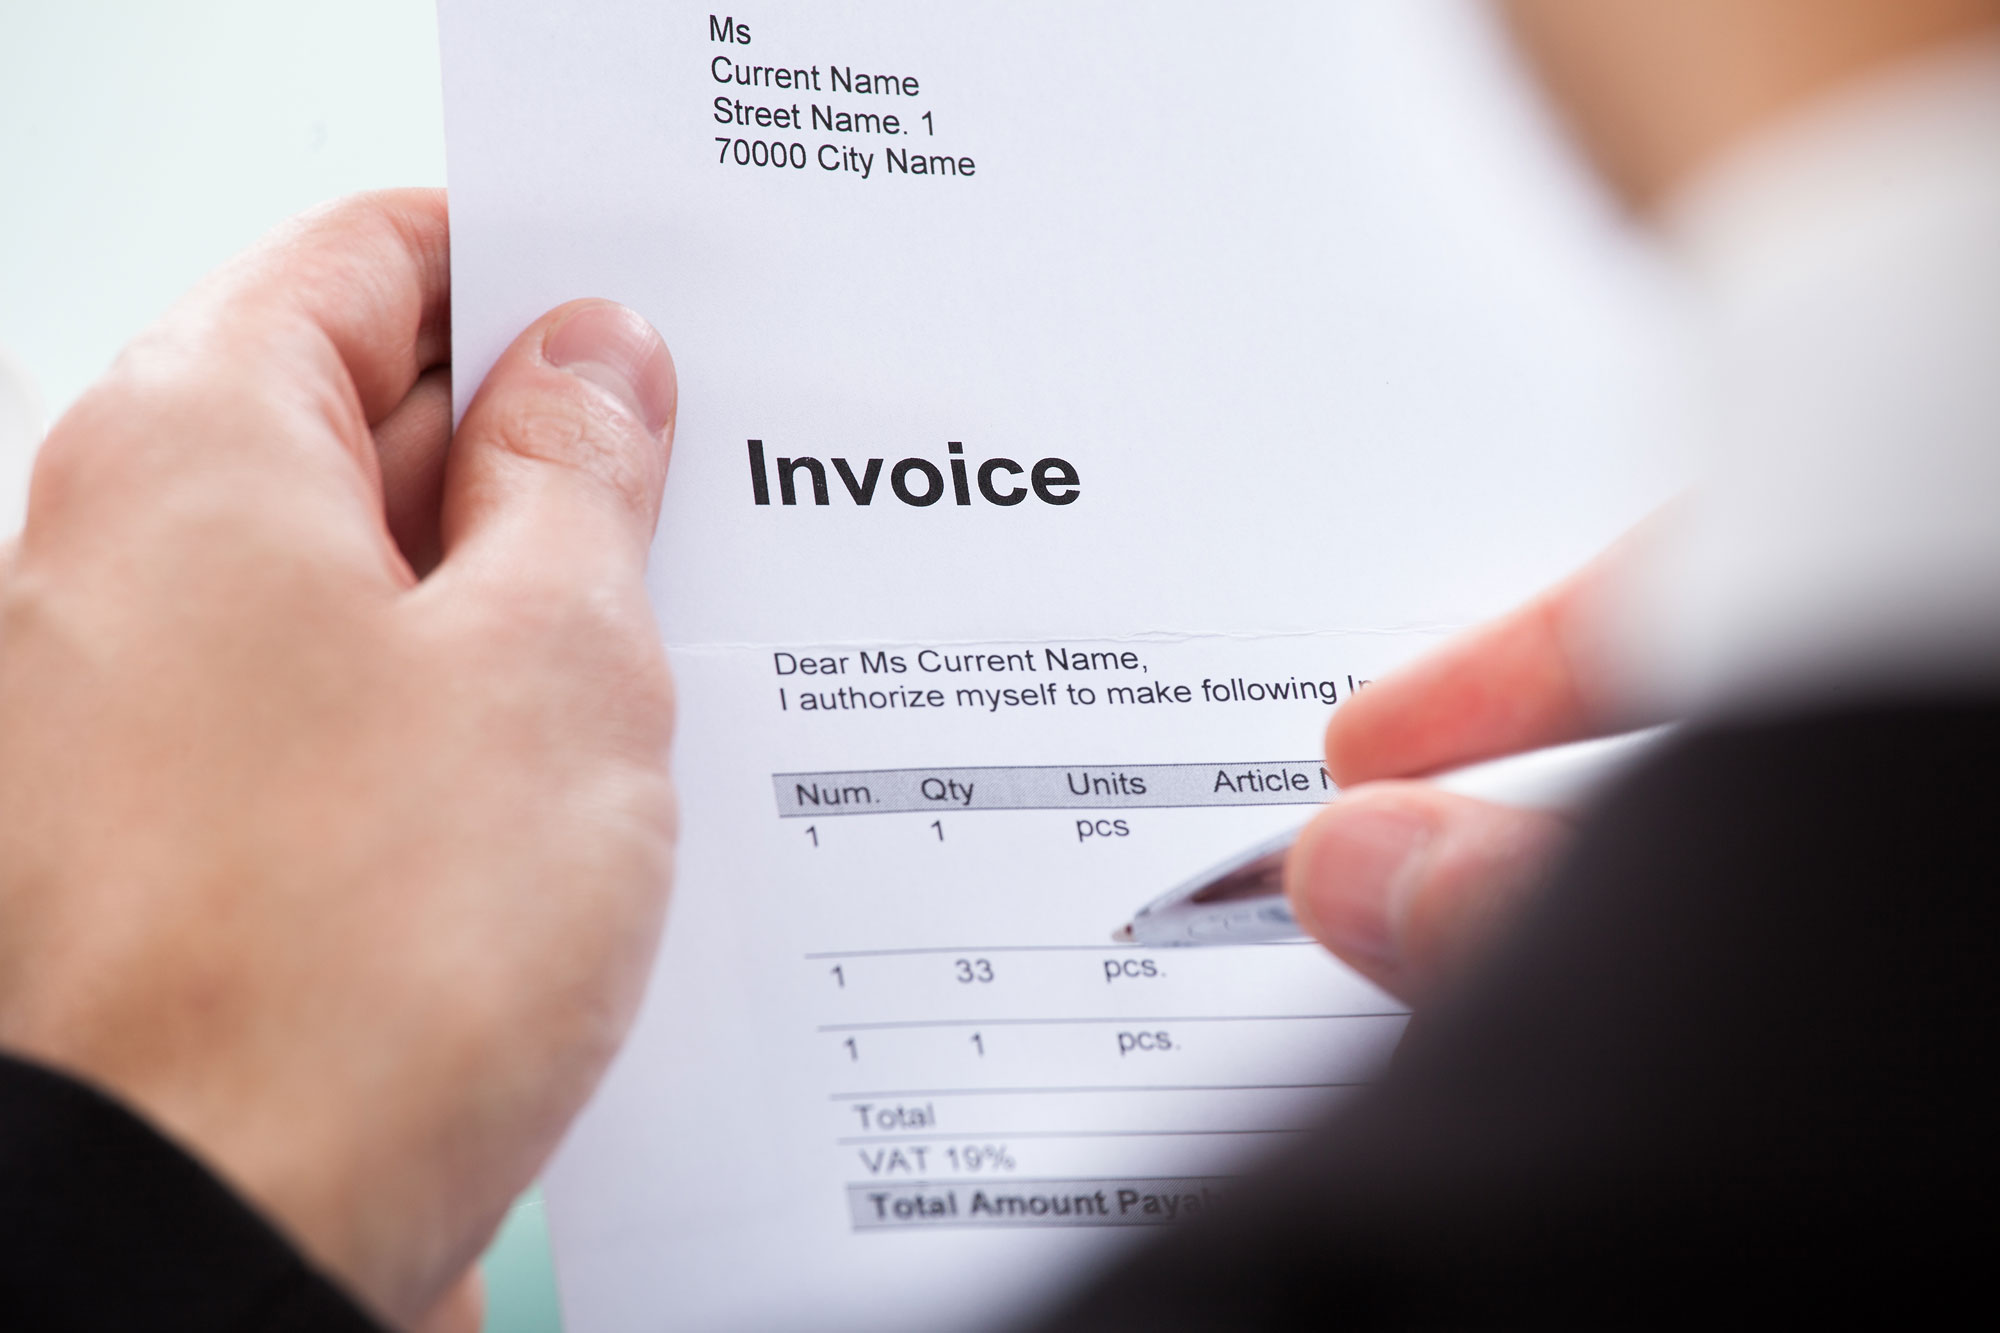 When to issue an invoice? (15)